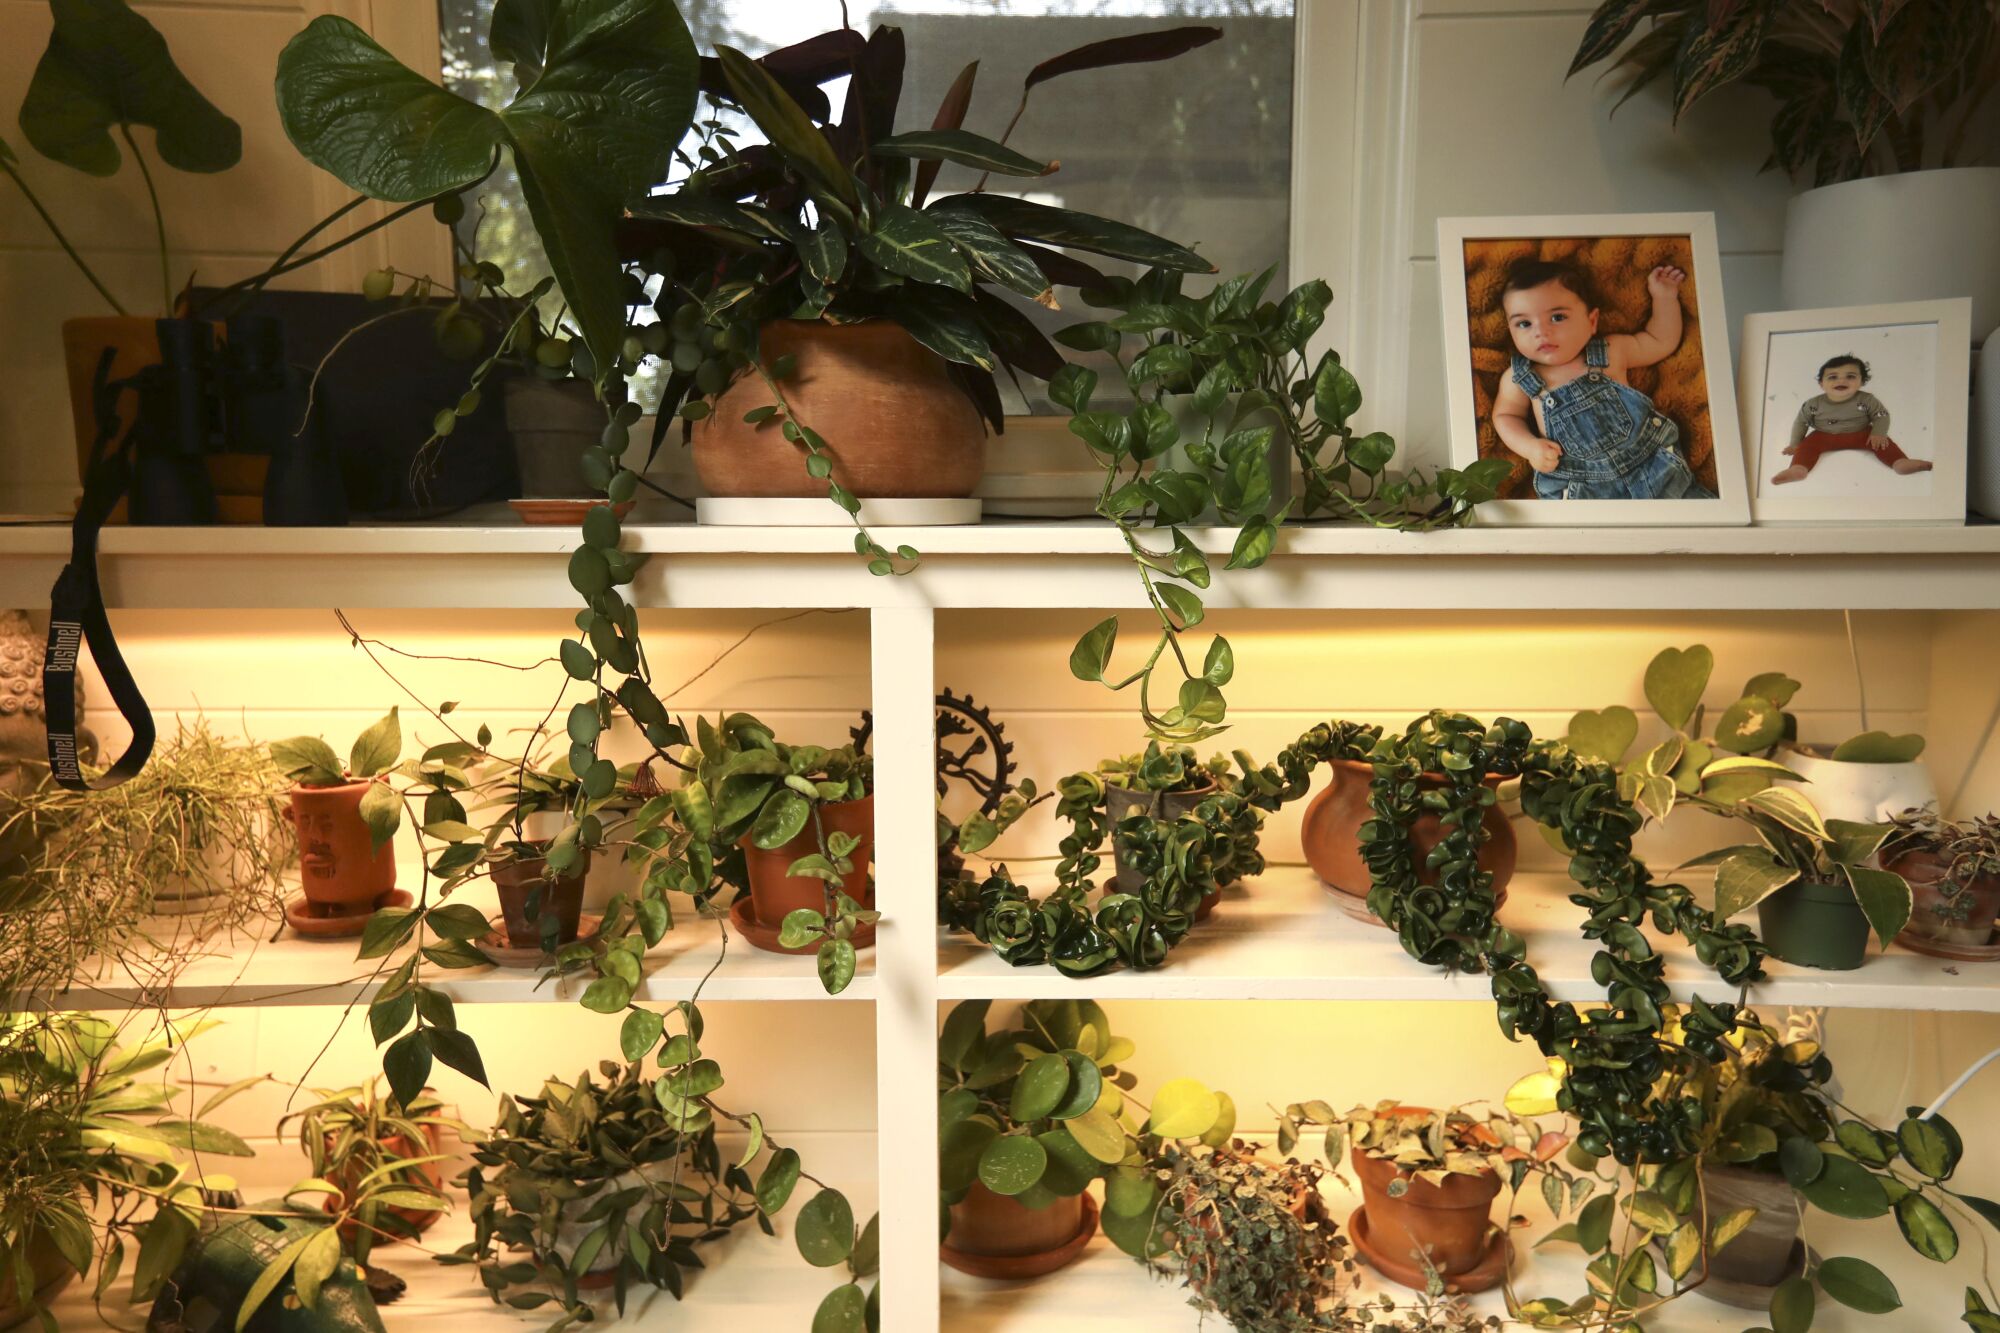 The shelves of the Bazic family home are adorned with plants and family portraits.